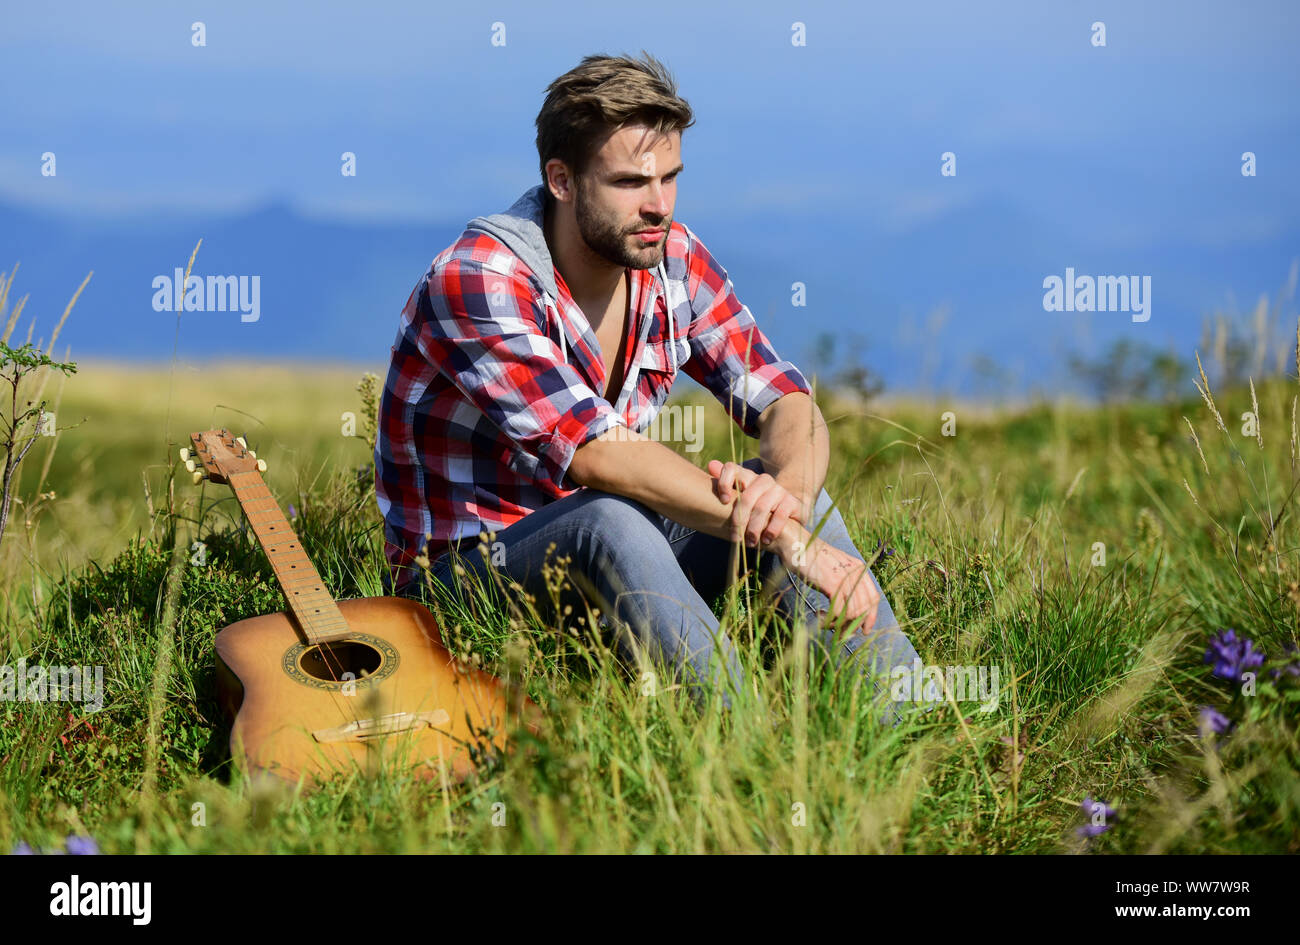 Pleasant time alone. Musician looking for inspiration. Dreamy wanderer. Wanderlust concept. Summer vacation highlands nature. Peaceful mood. Guy with guitar contemplate nature. Inspiring nature. Stock Photo